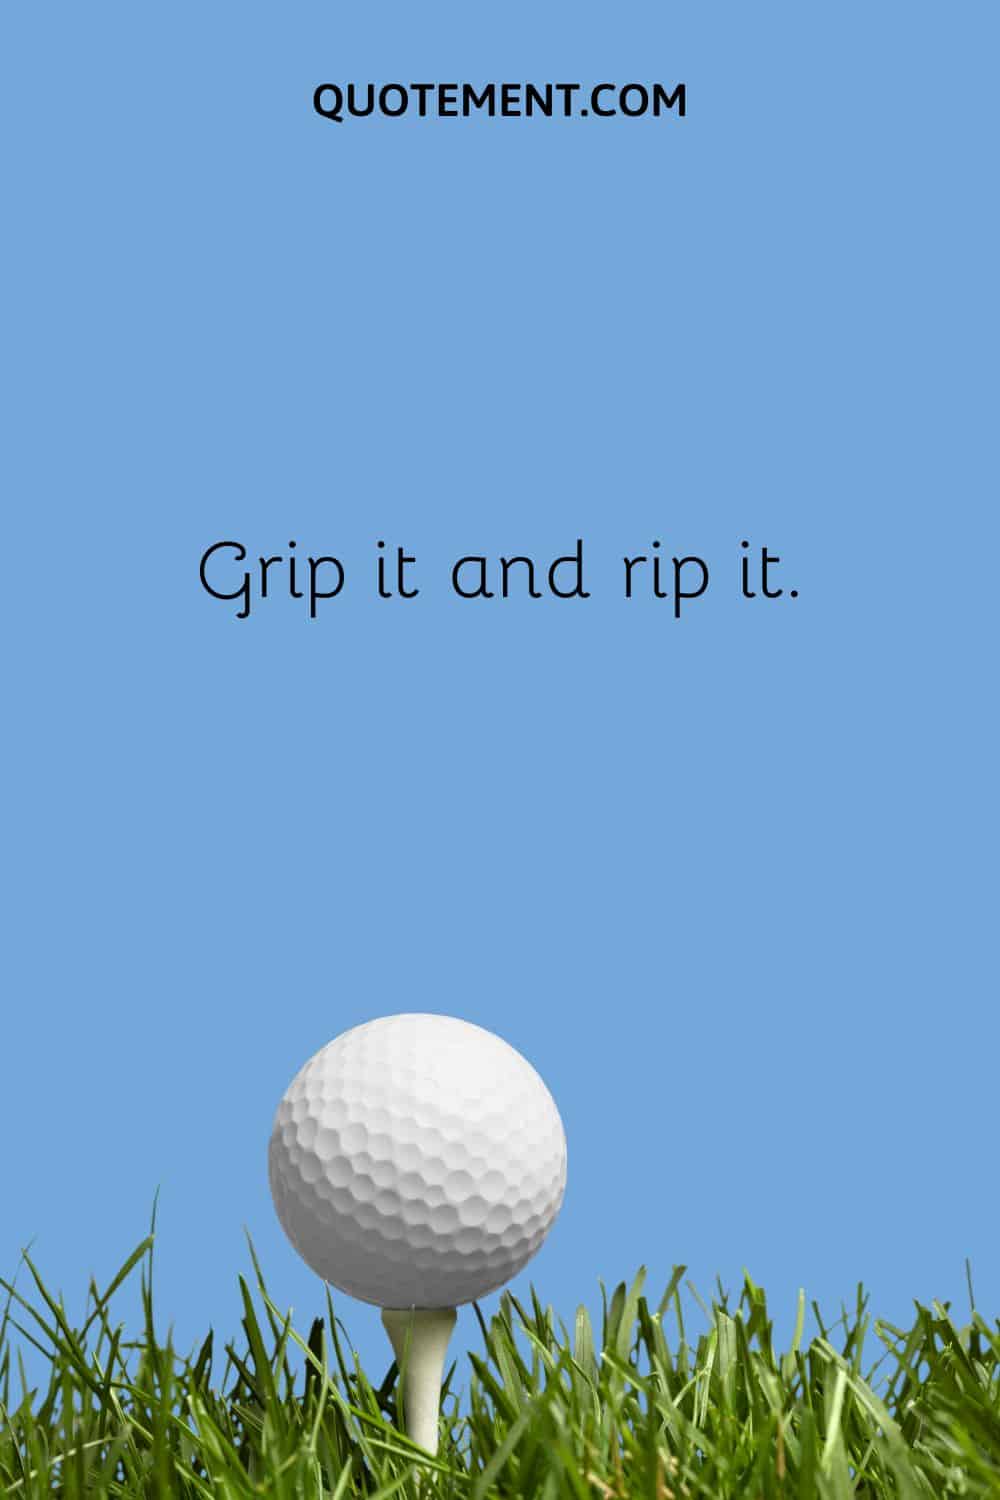 Grip it and rip it.